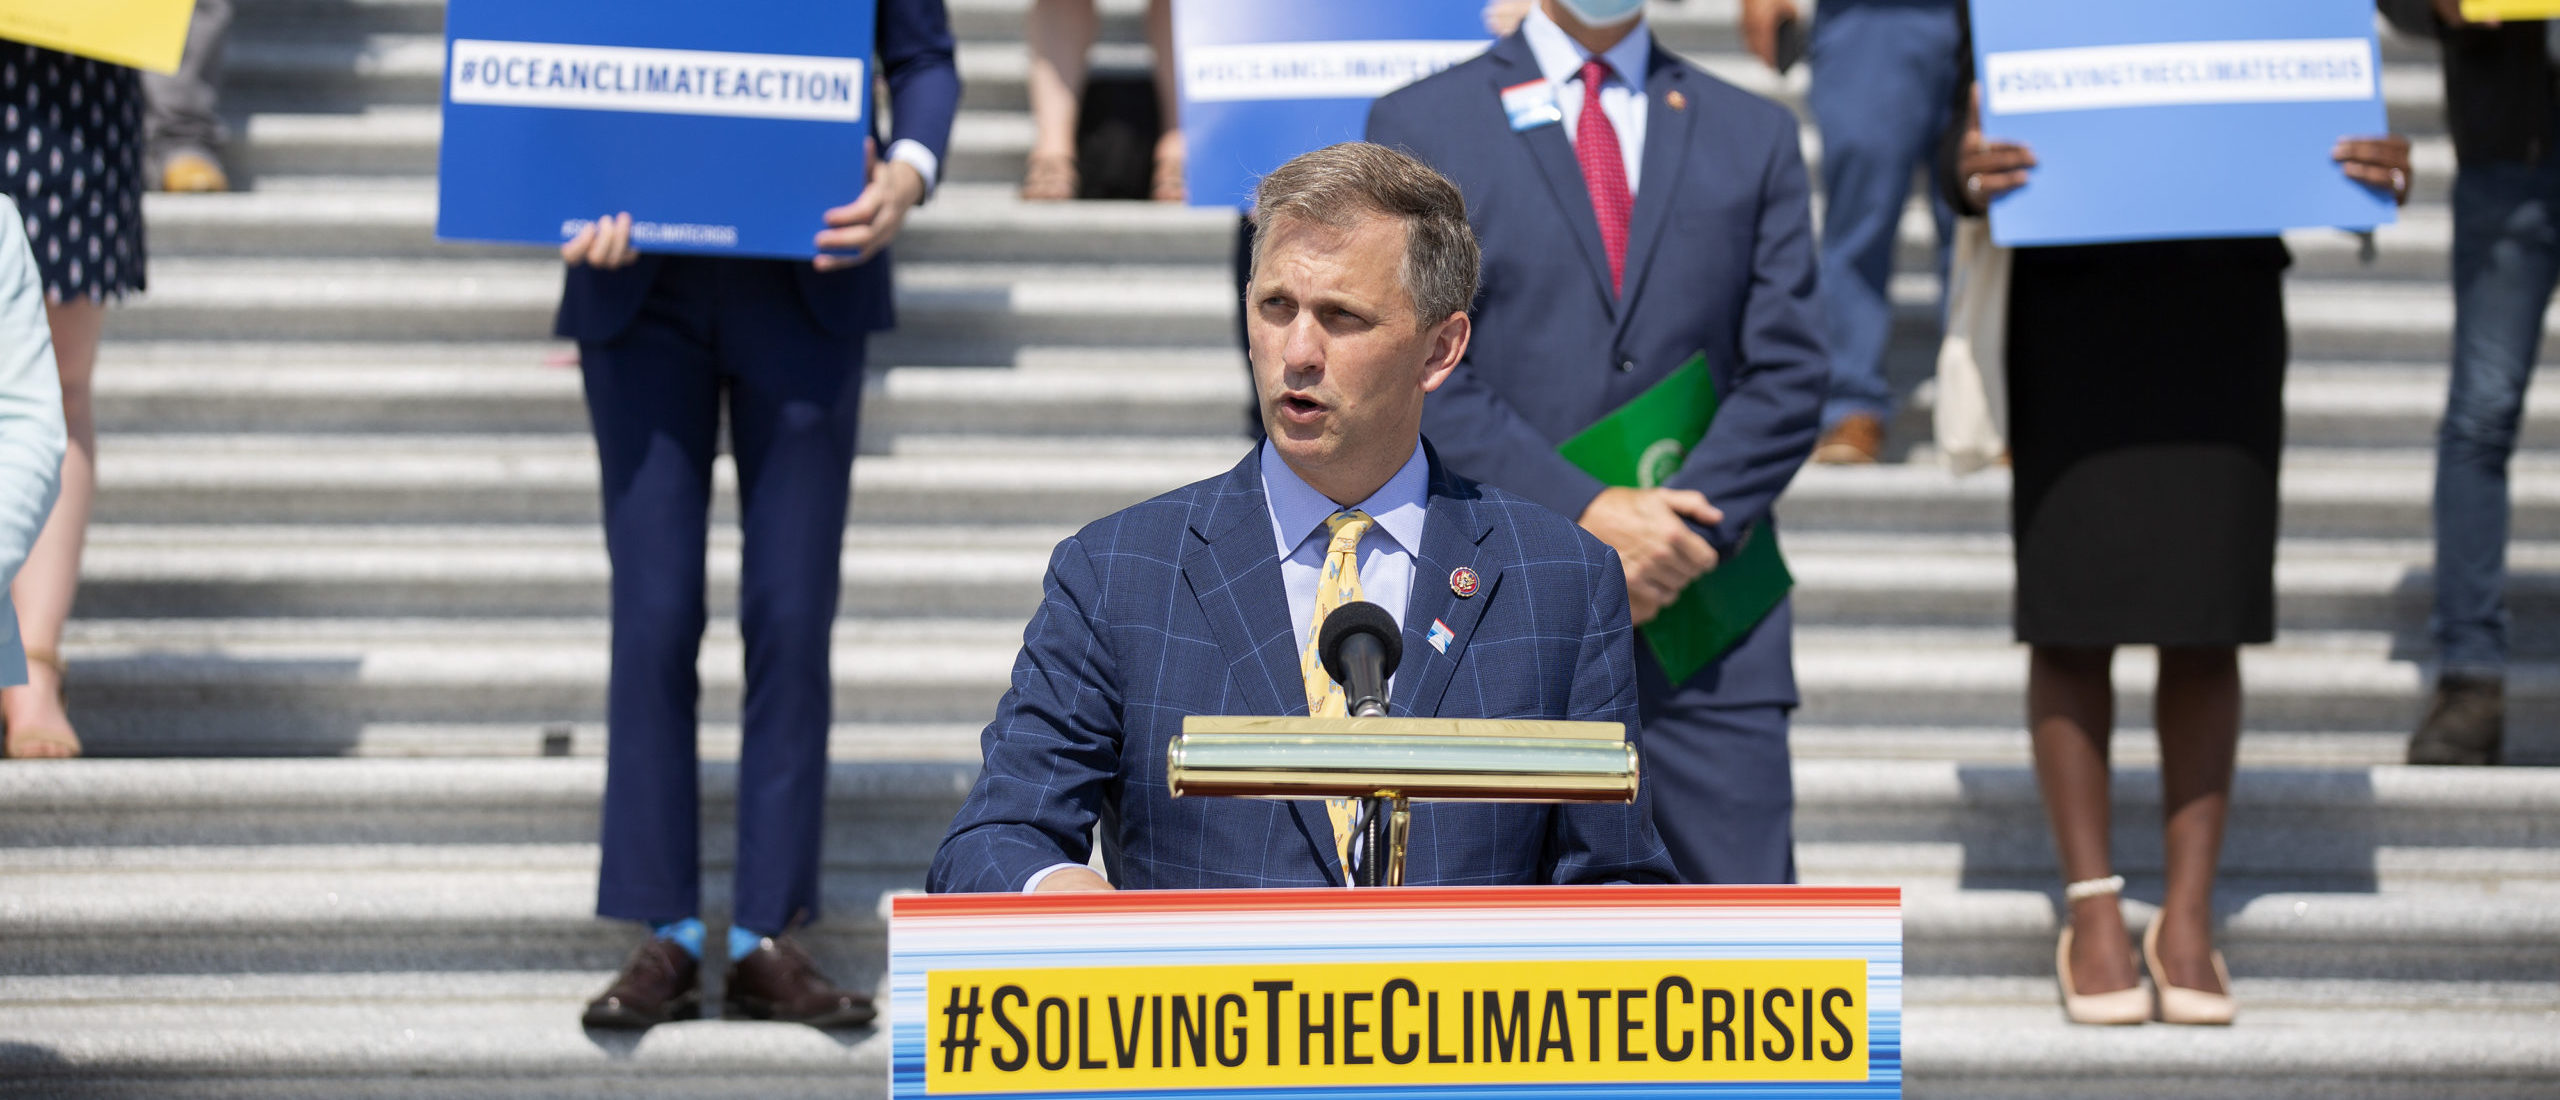 WASHINGTON, DC - JUNE 30: U.S. Rep. Sean Casten (D-IL), joined by members of the Select Committee on the Climate Crisis, delivers remarks during a news conference outside the U.S. Capitol on June 30, 2020 in Washington, DC. Speaker of the House Nancy Pelosi (D-CA) joined her colleagues to unveil the Climate Crisis action plan, which calls for government mandates, tax incentives and new infrastructure to bring the U.S. economys greenhouse gas emissions to zero by 2050. (Photo by Stefani Reynolds/Getty Images)